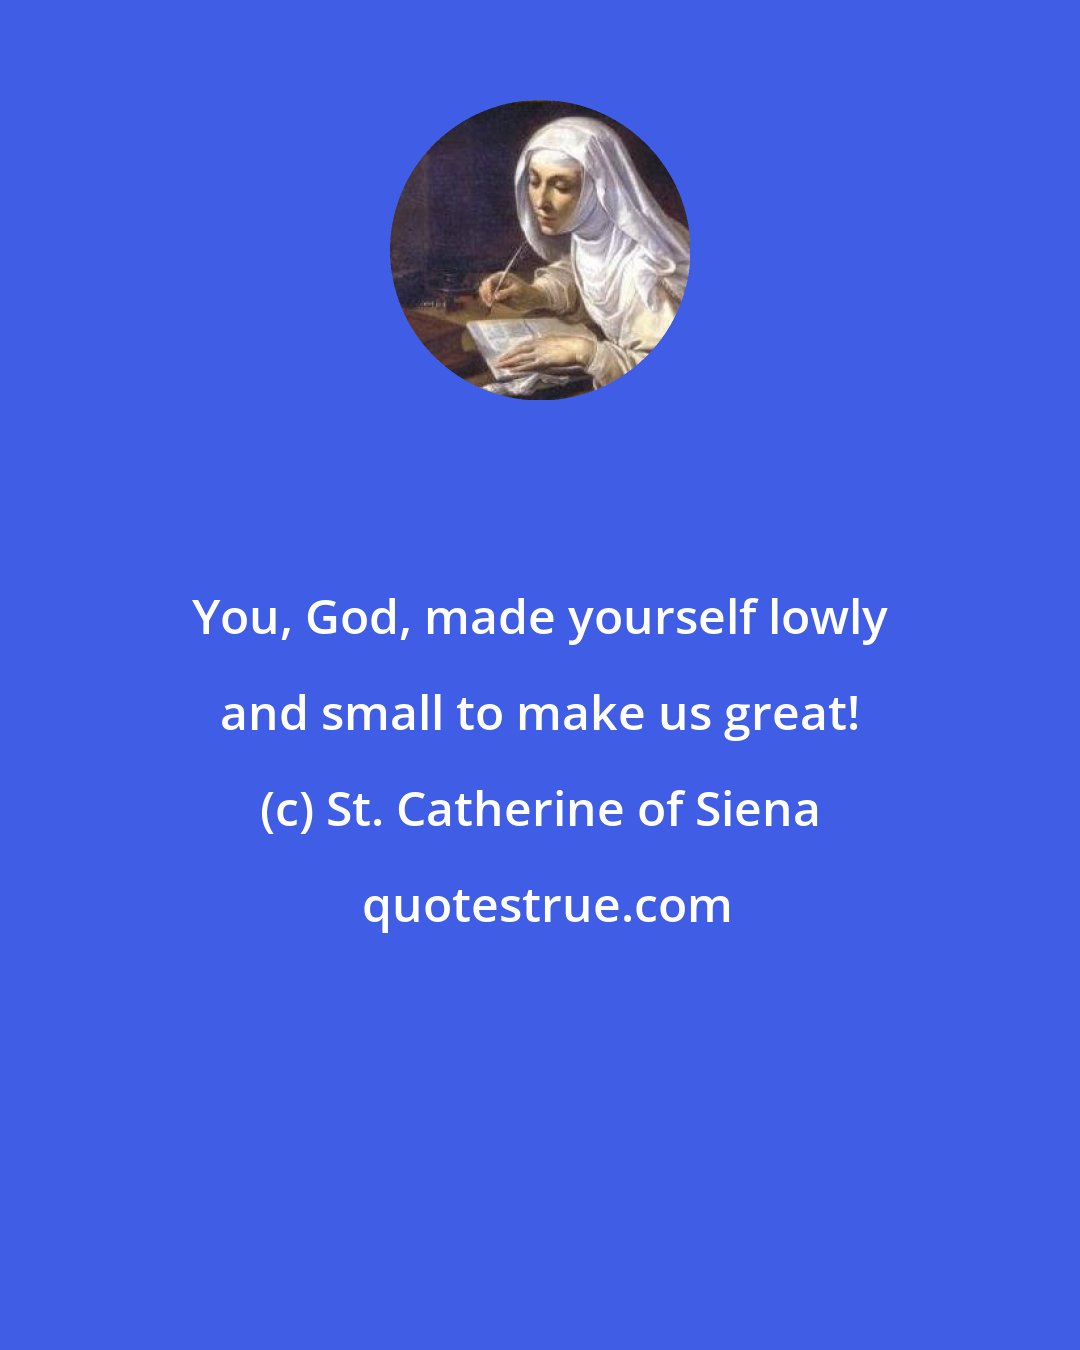 St. Catherine of Siena: You, God, made yourself lowly and small to make us great!